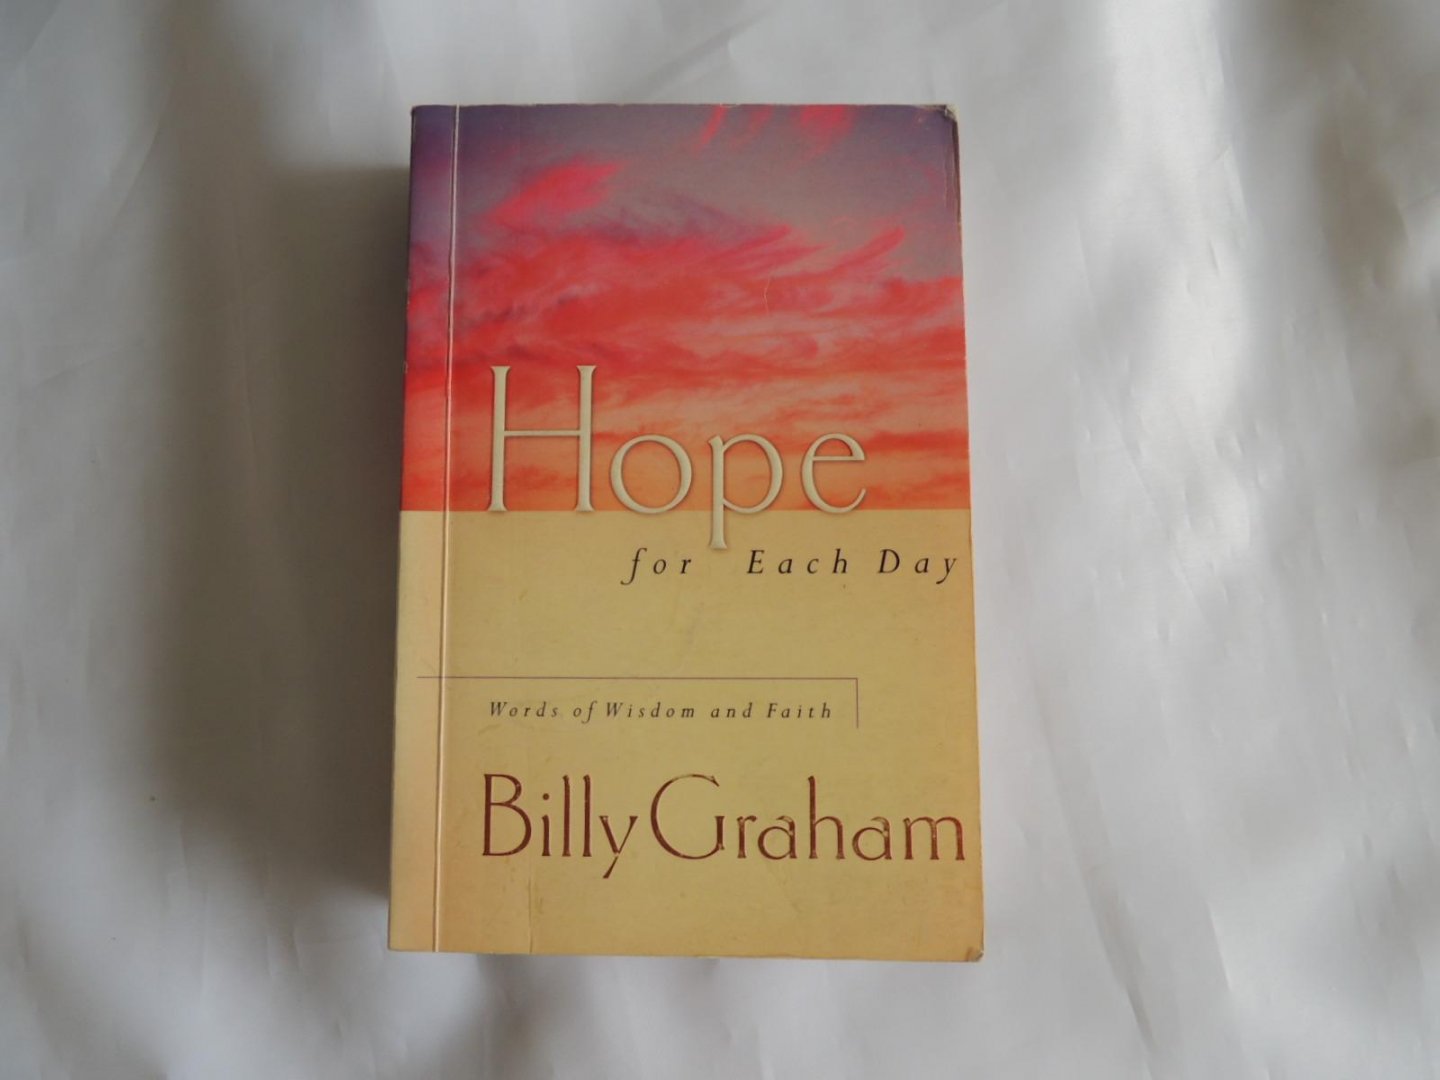 Graham, Billy - Hope for Each Day - Words of Wisdom And Faith